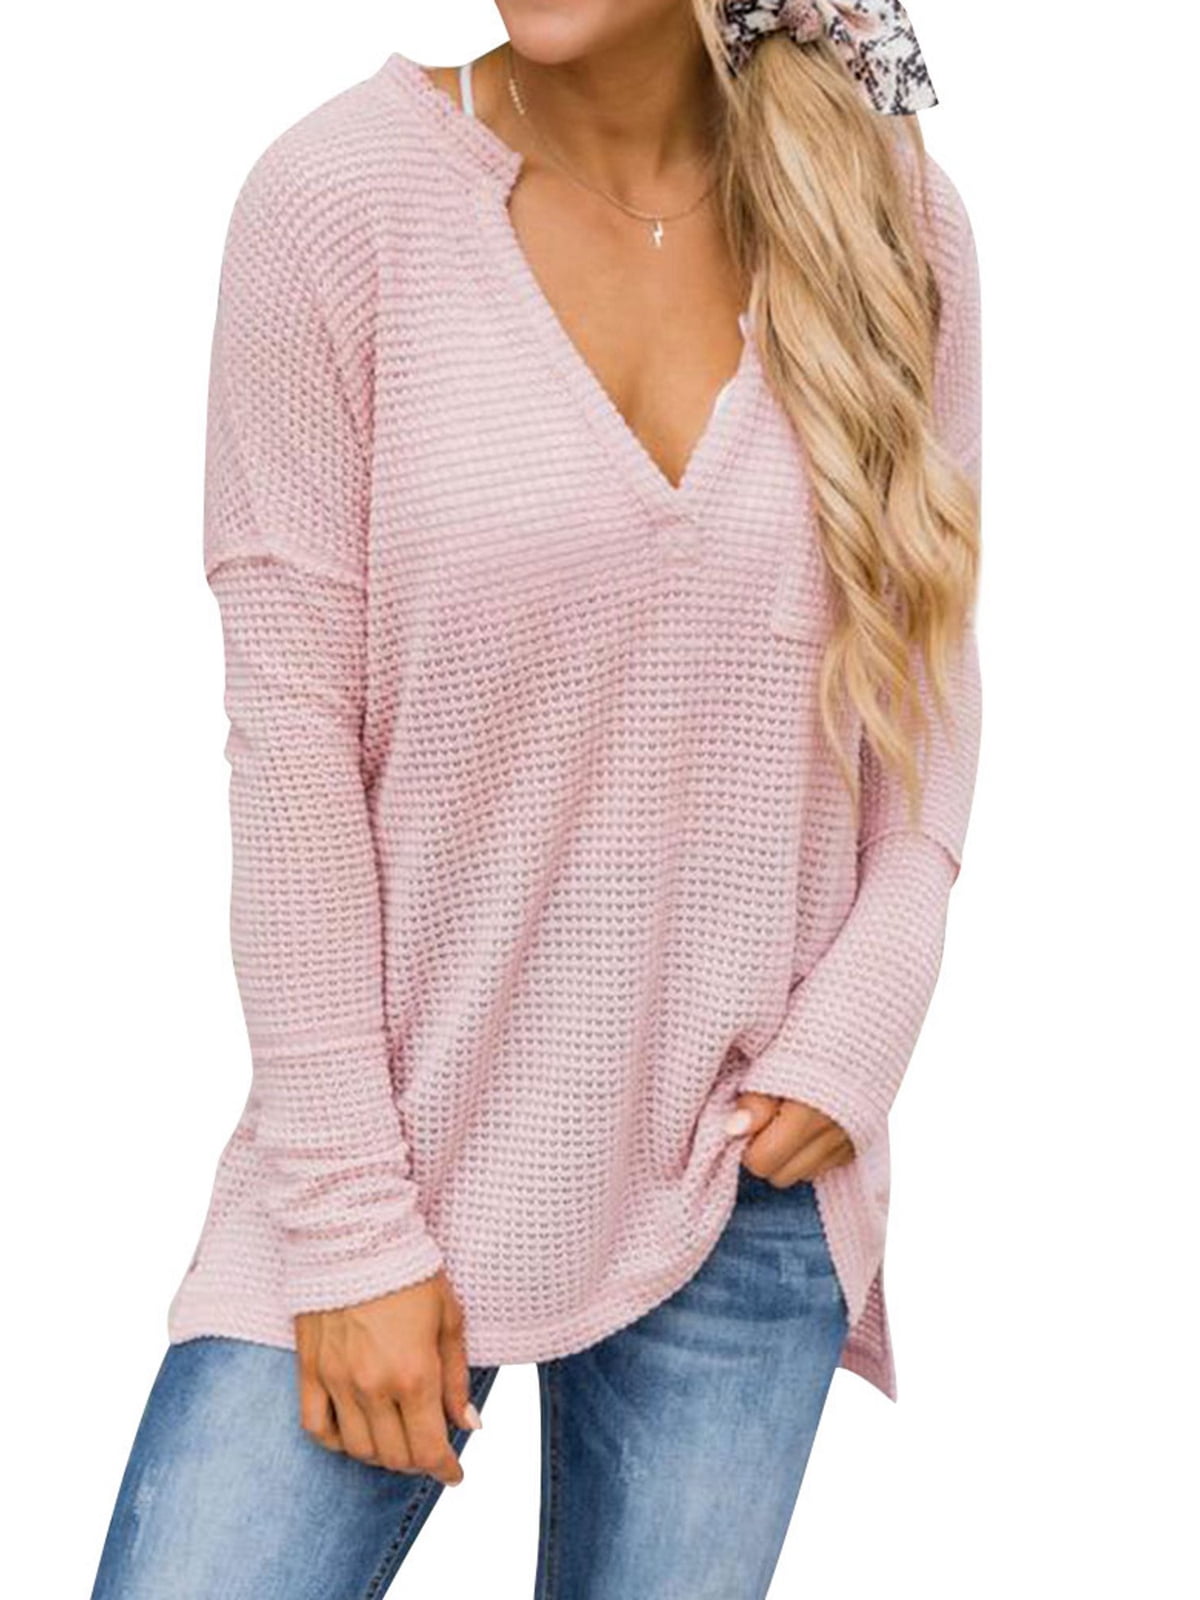 Astylish Womens V Neck Waffle Knit Tunic Blouse Side Slits High Low Top 